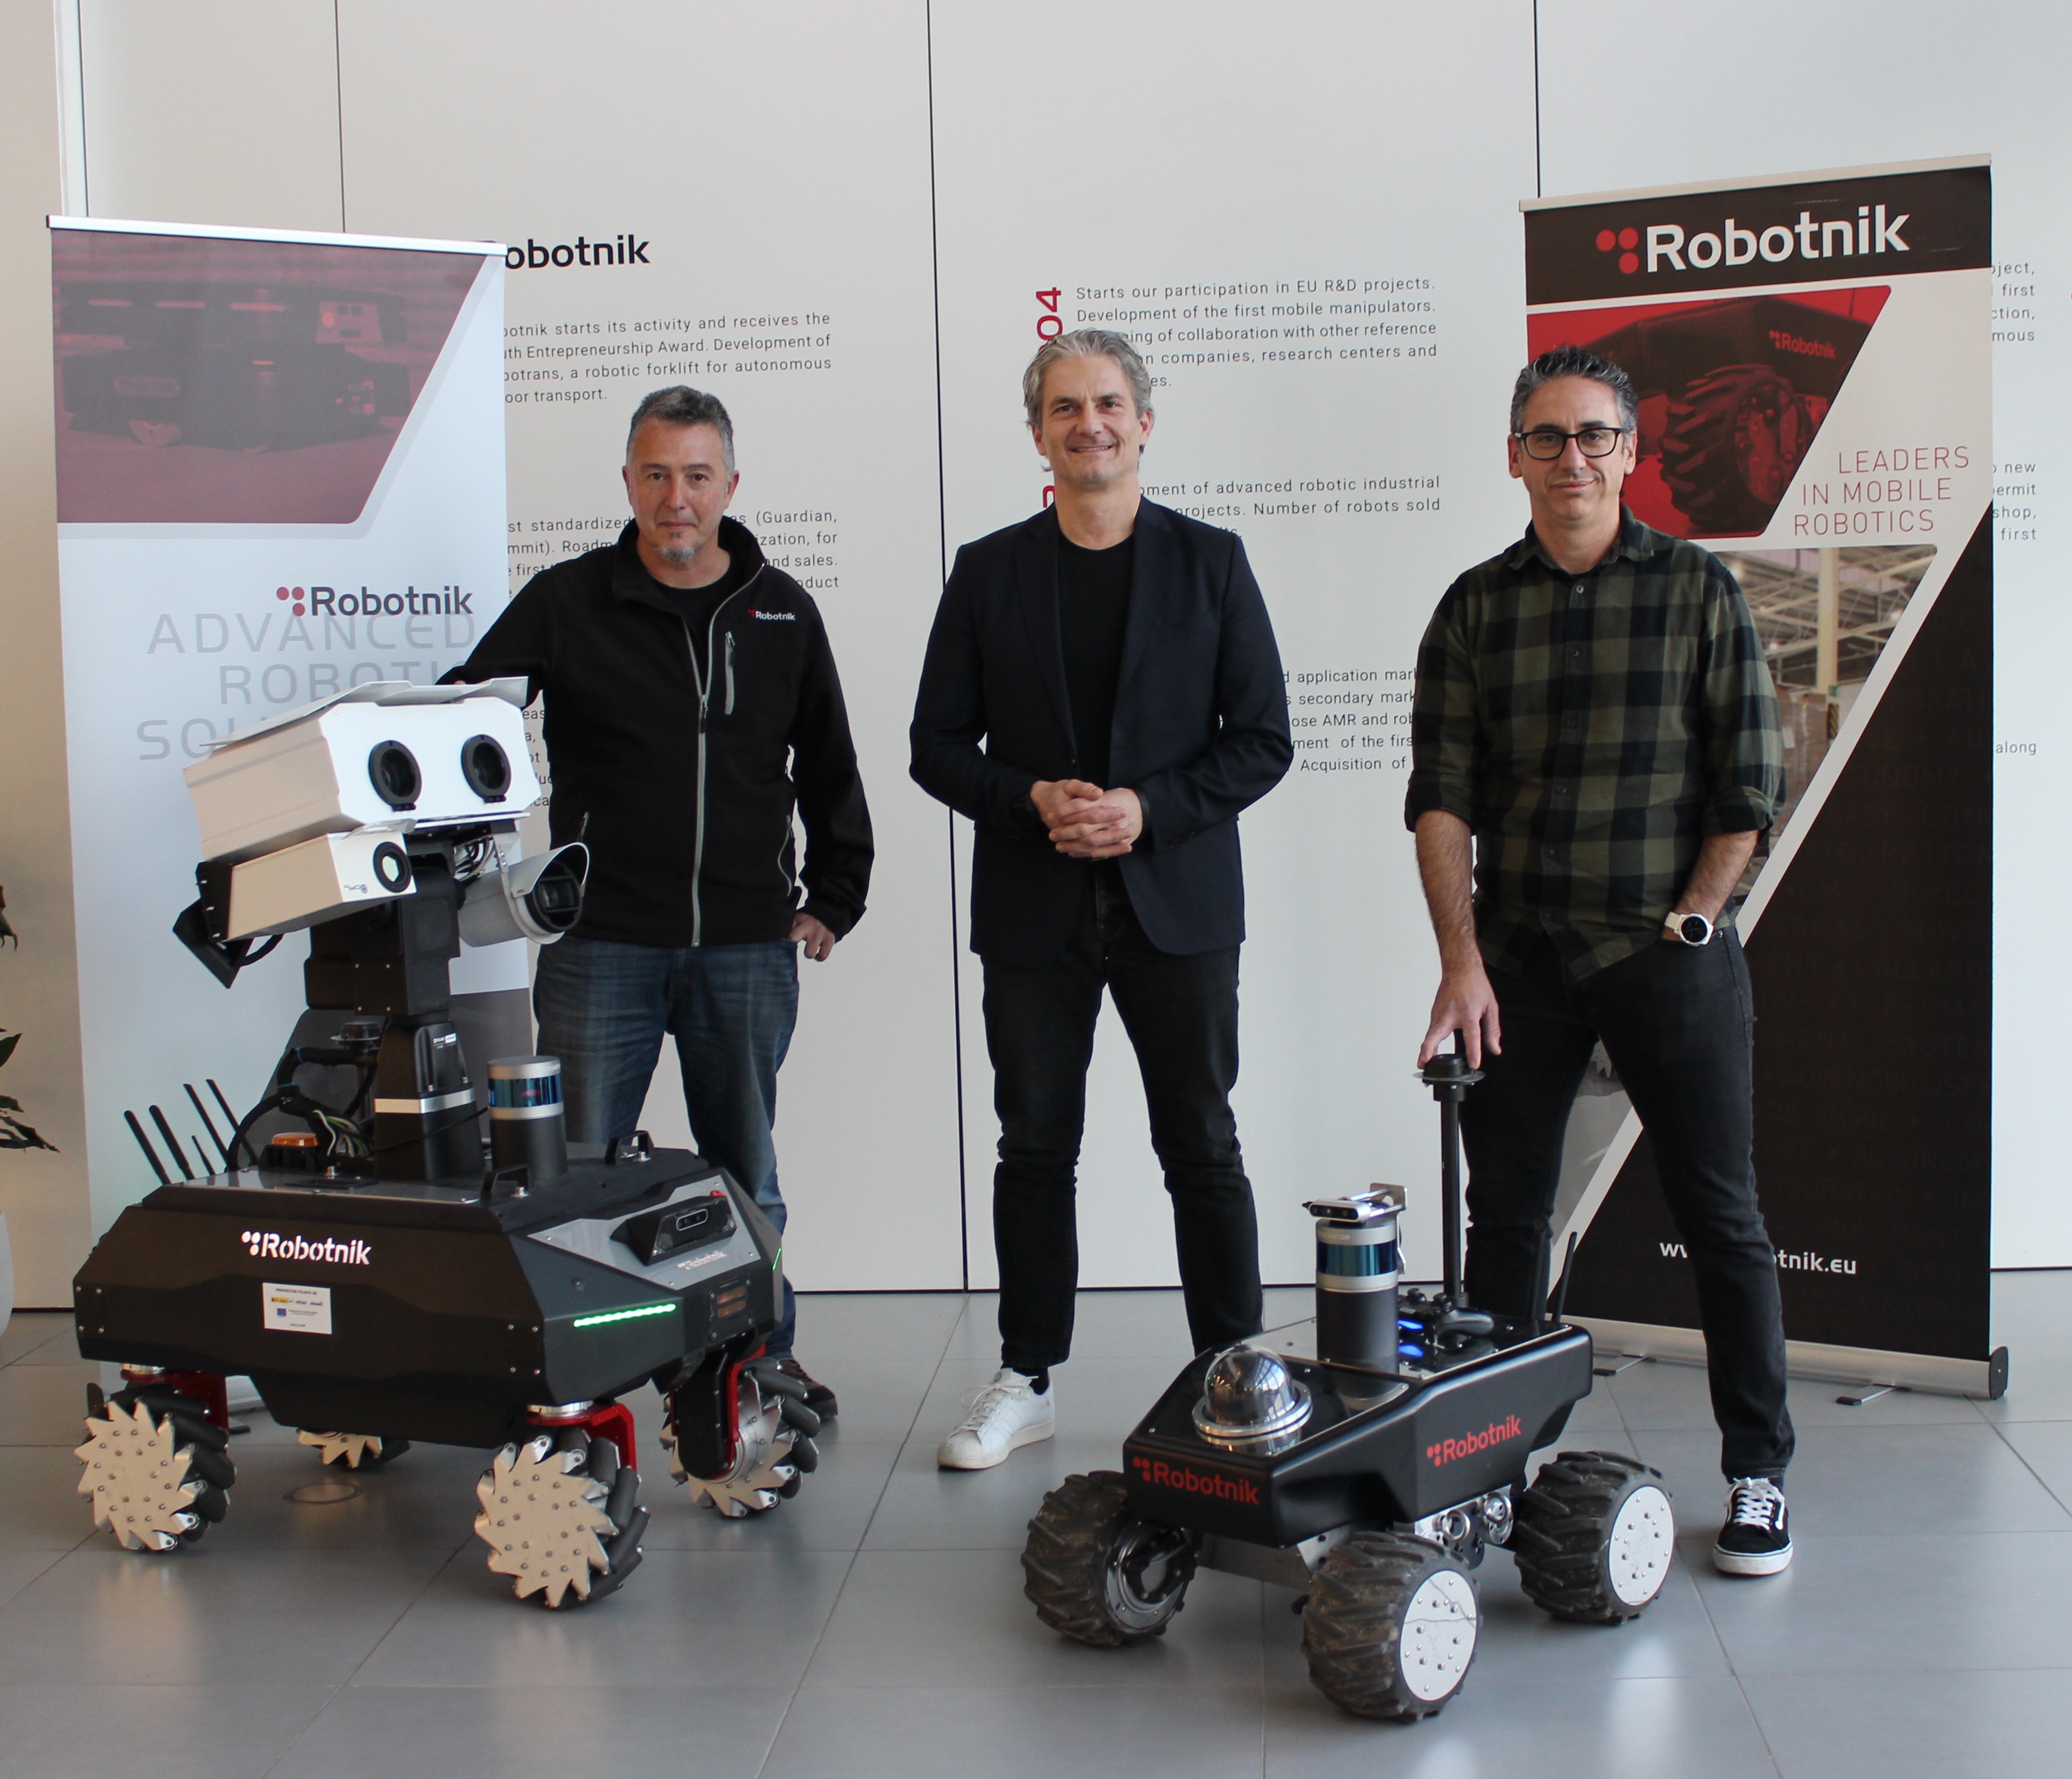 United Robotics Group GmbH strengthens ecosystem of European robotics leaders with the acquisition of Robotnik Automation S.L.L.